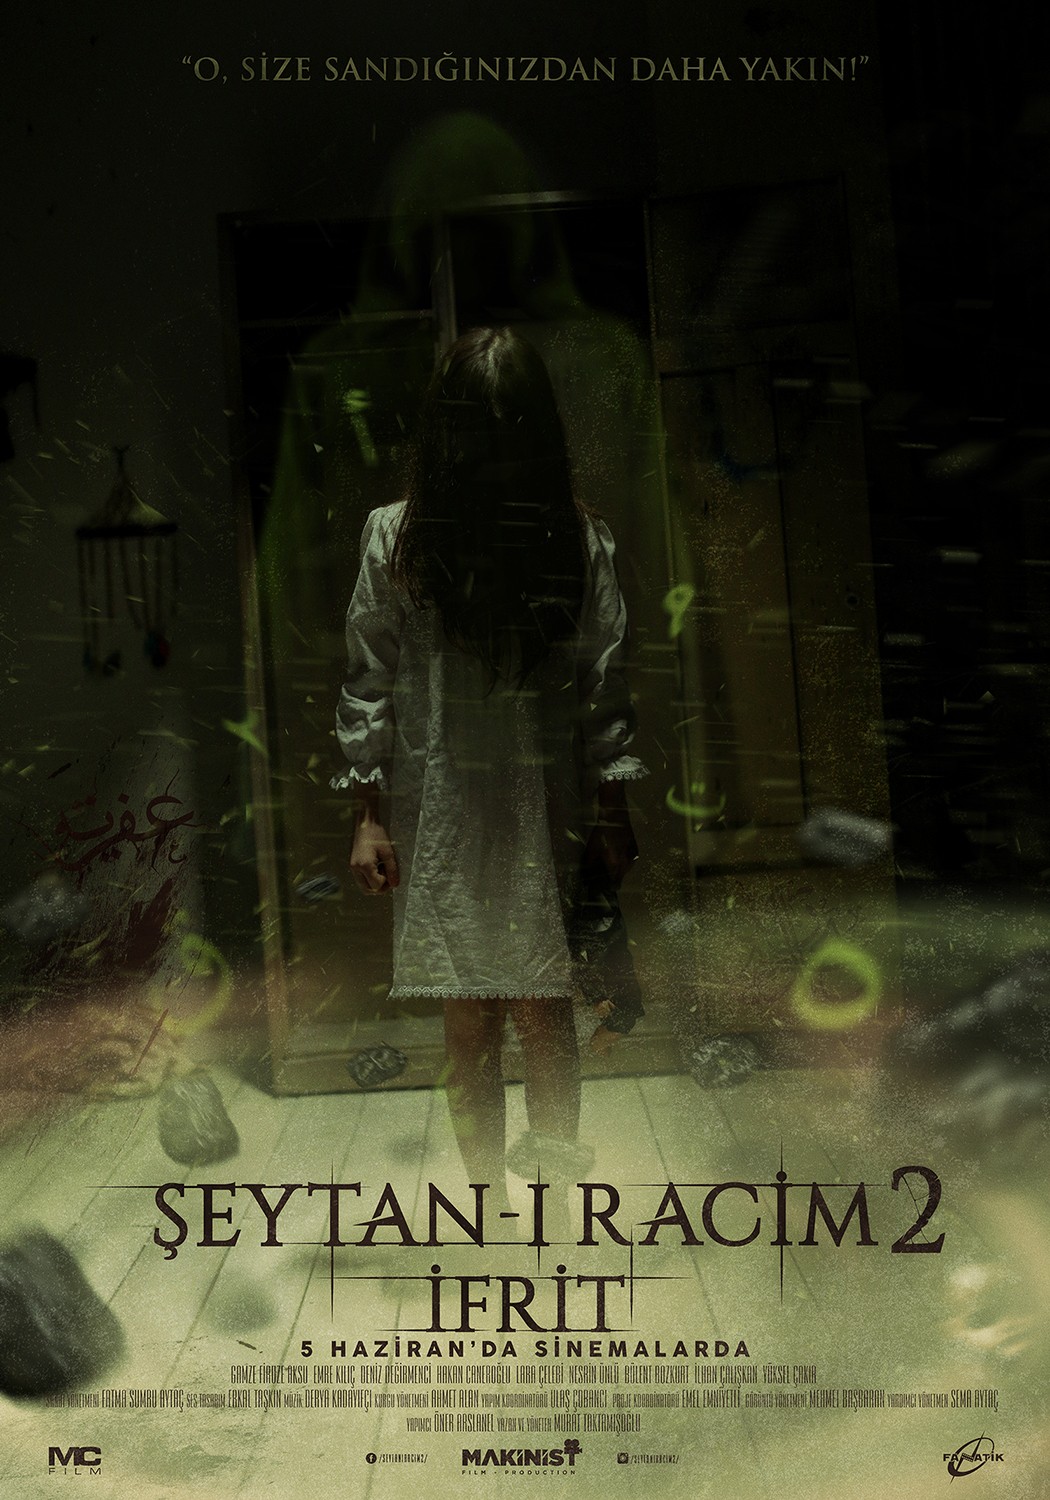 Extra Large Movie Poster Image for Şeytan-ı Racim 2: İfrit (#2 of 3)